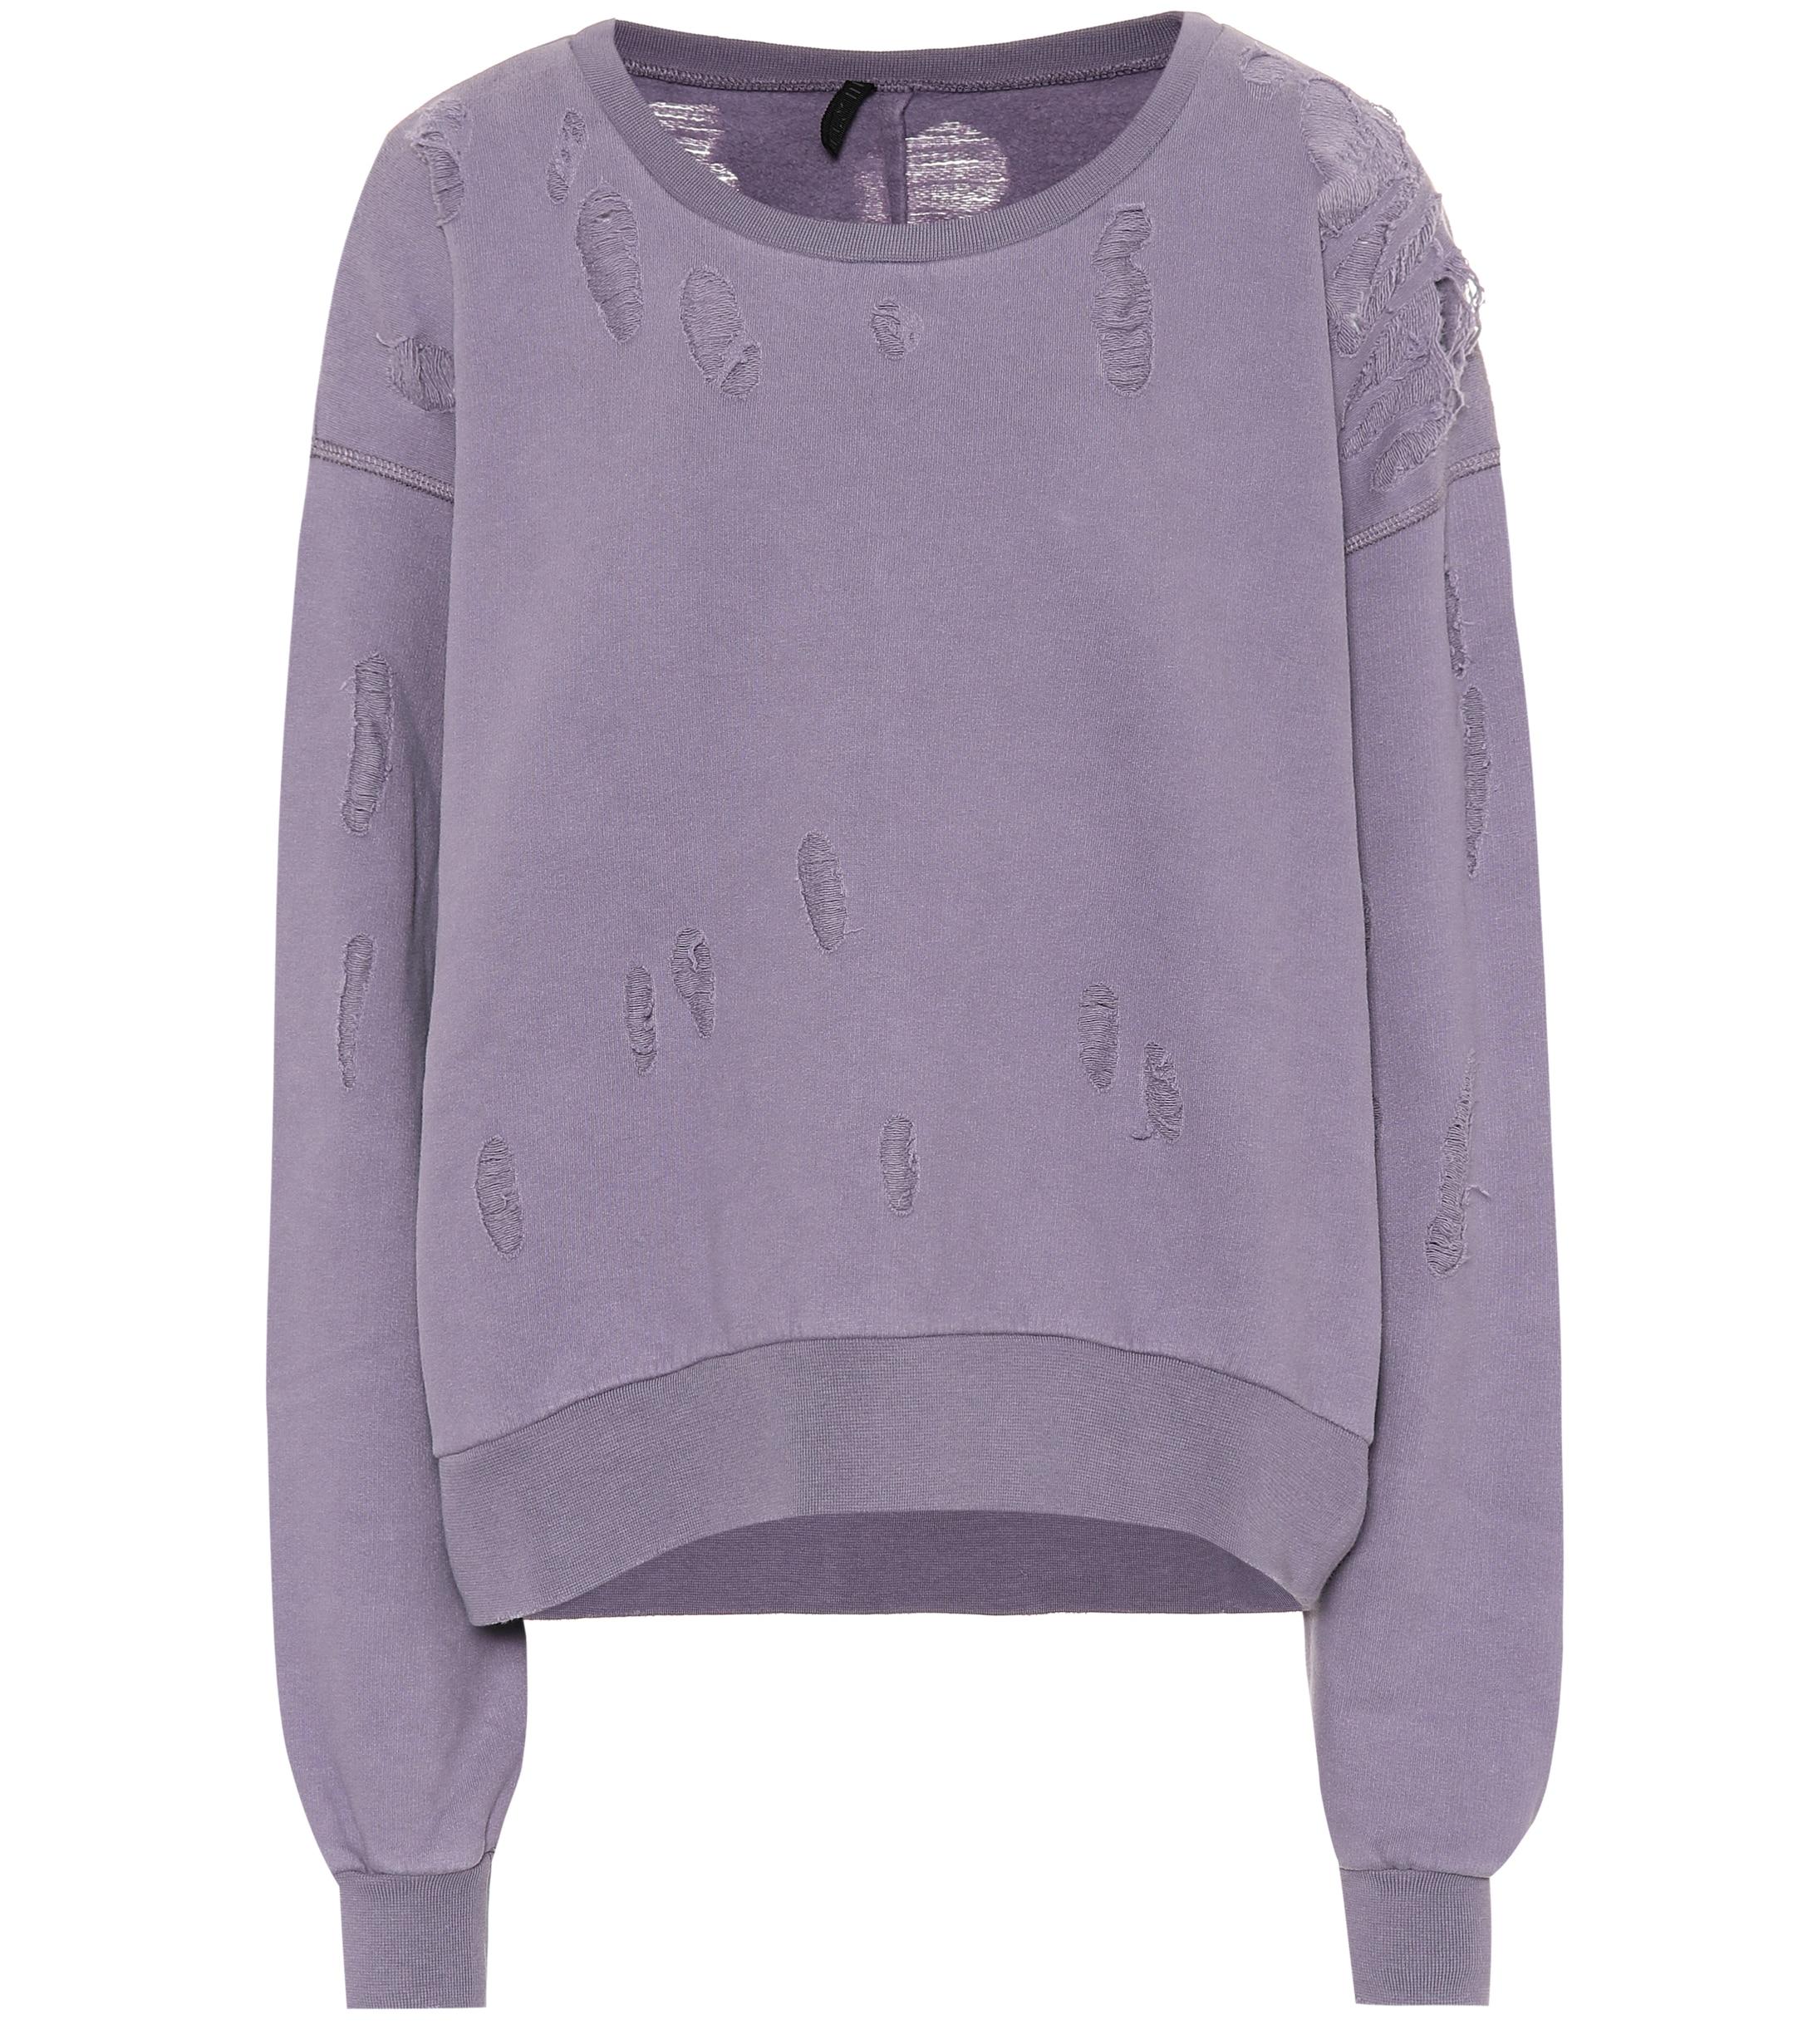 Unravel Project Distressed Cotton Hoodie in Purple - Lyst